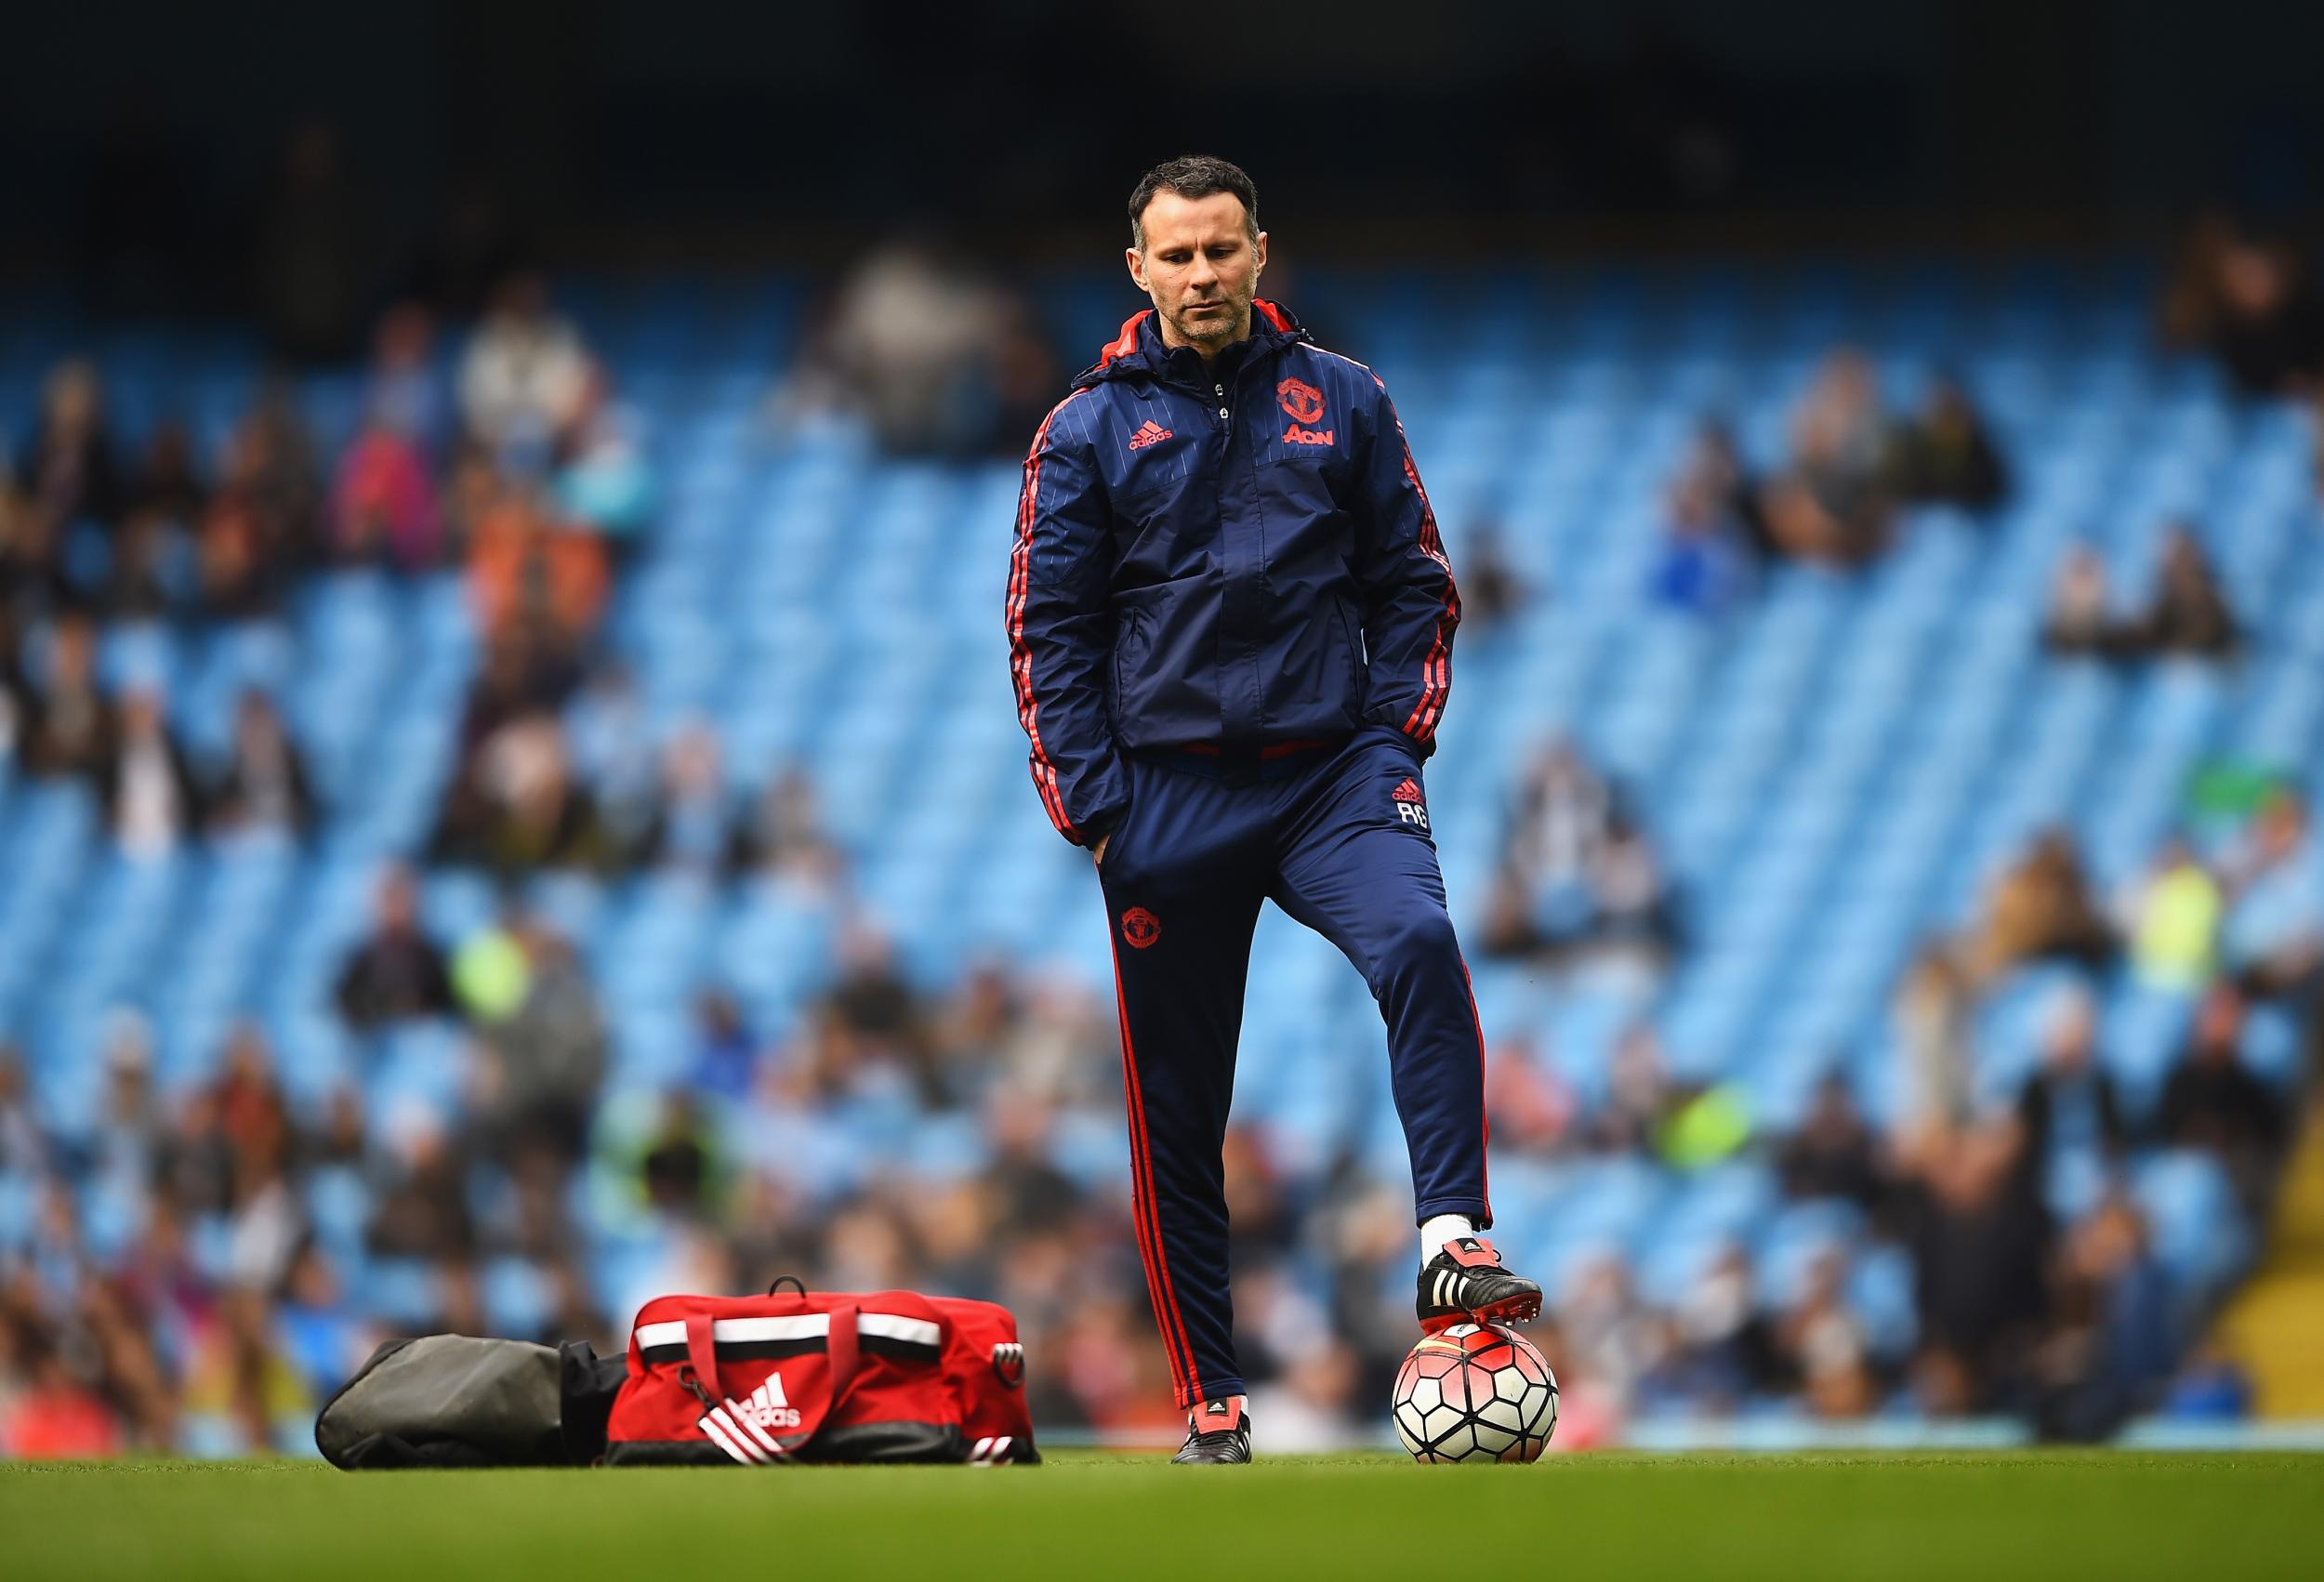 Ryan Giggs looks set to finally leave United